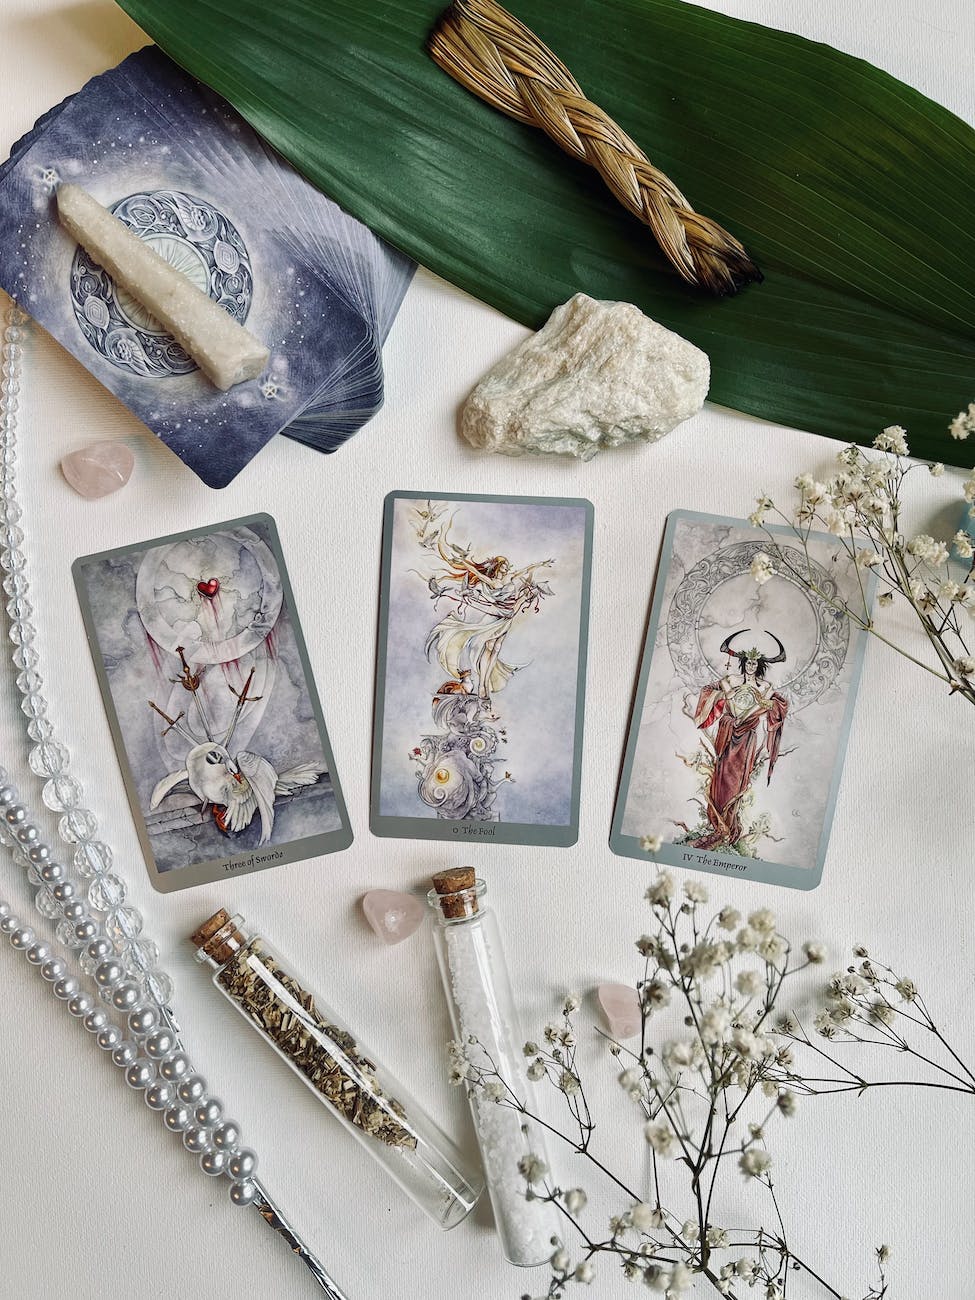 beautiful tarot spread on table with herbs and crystals